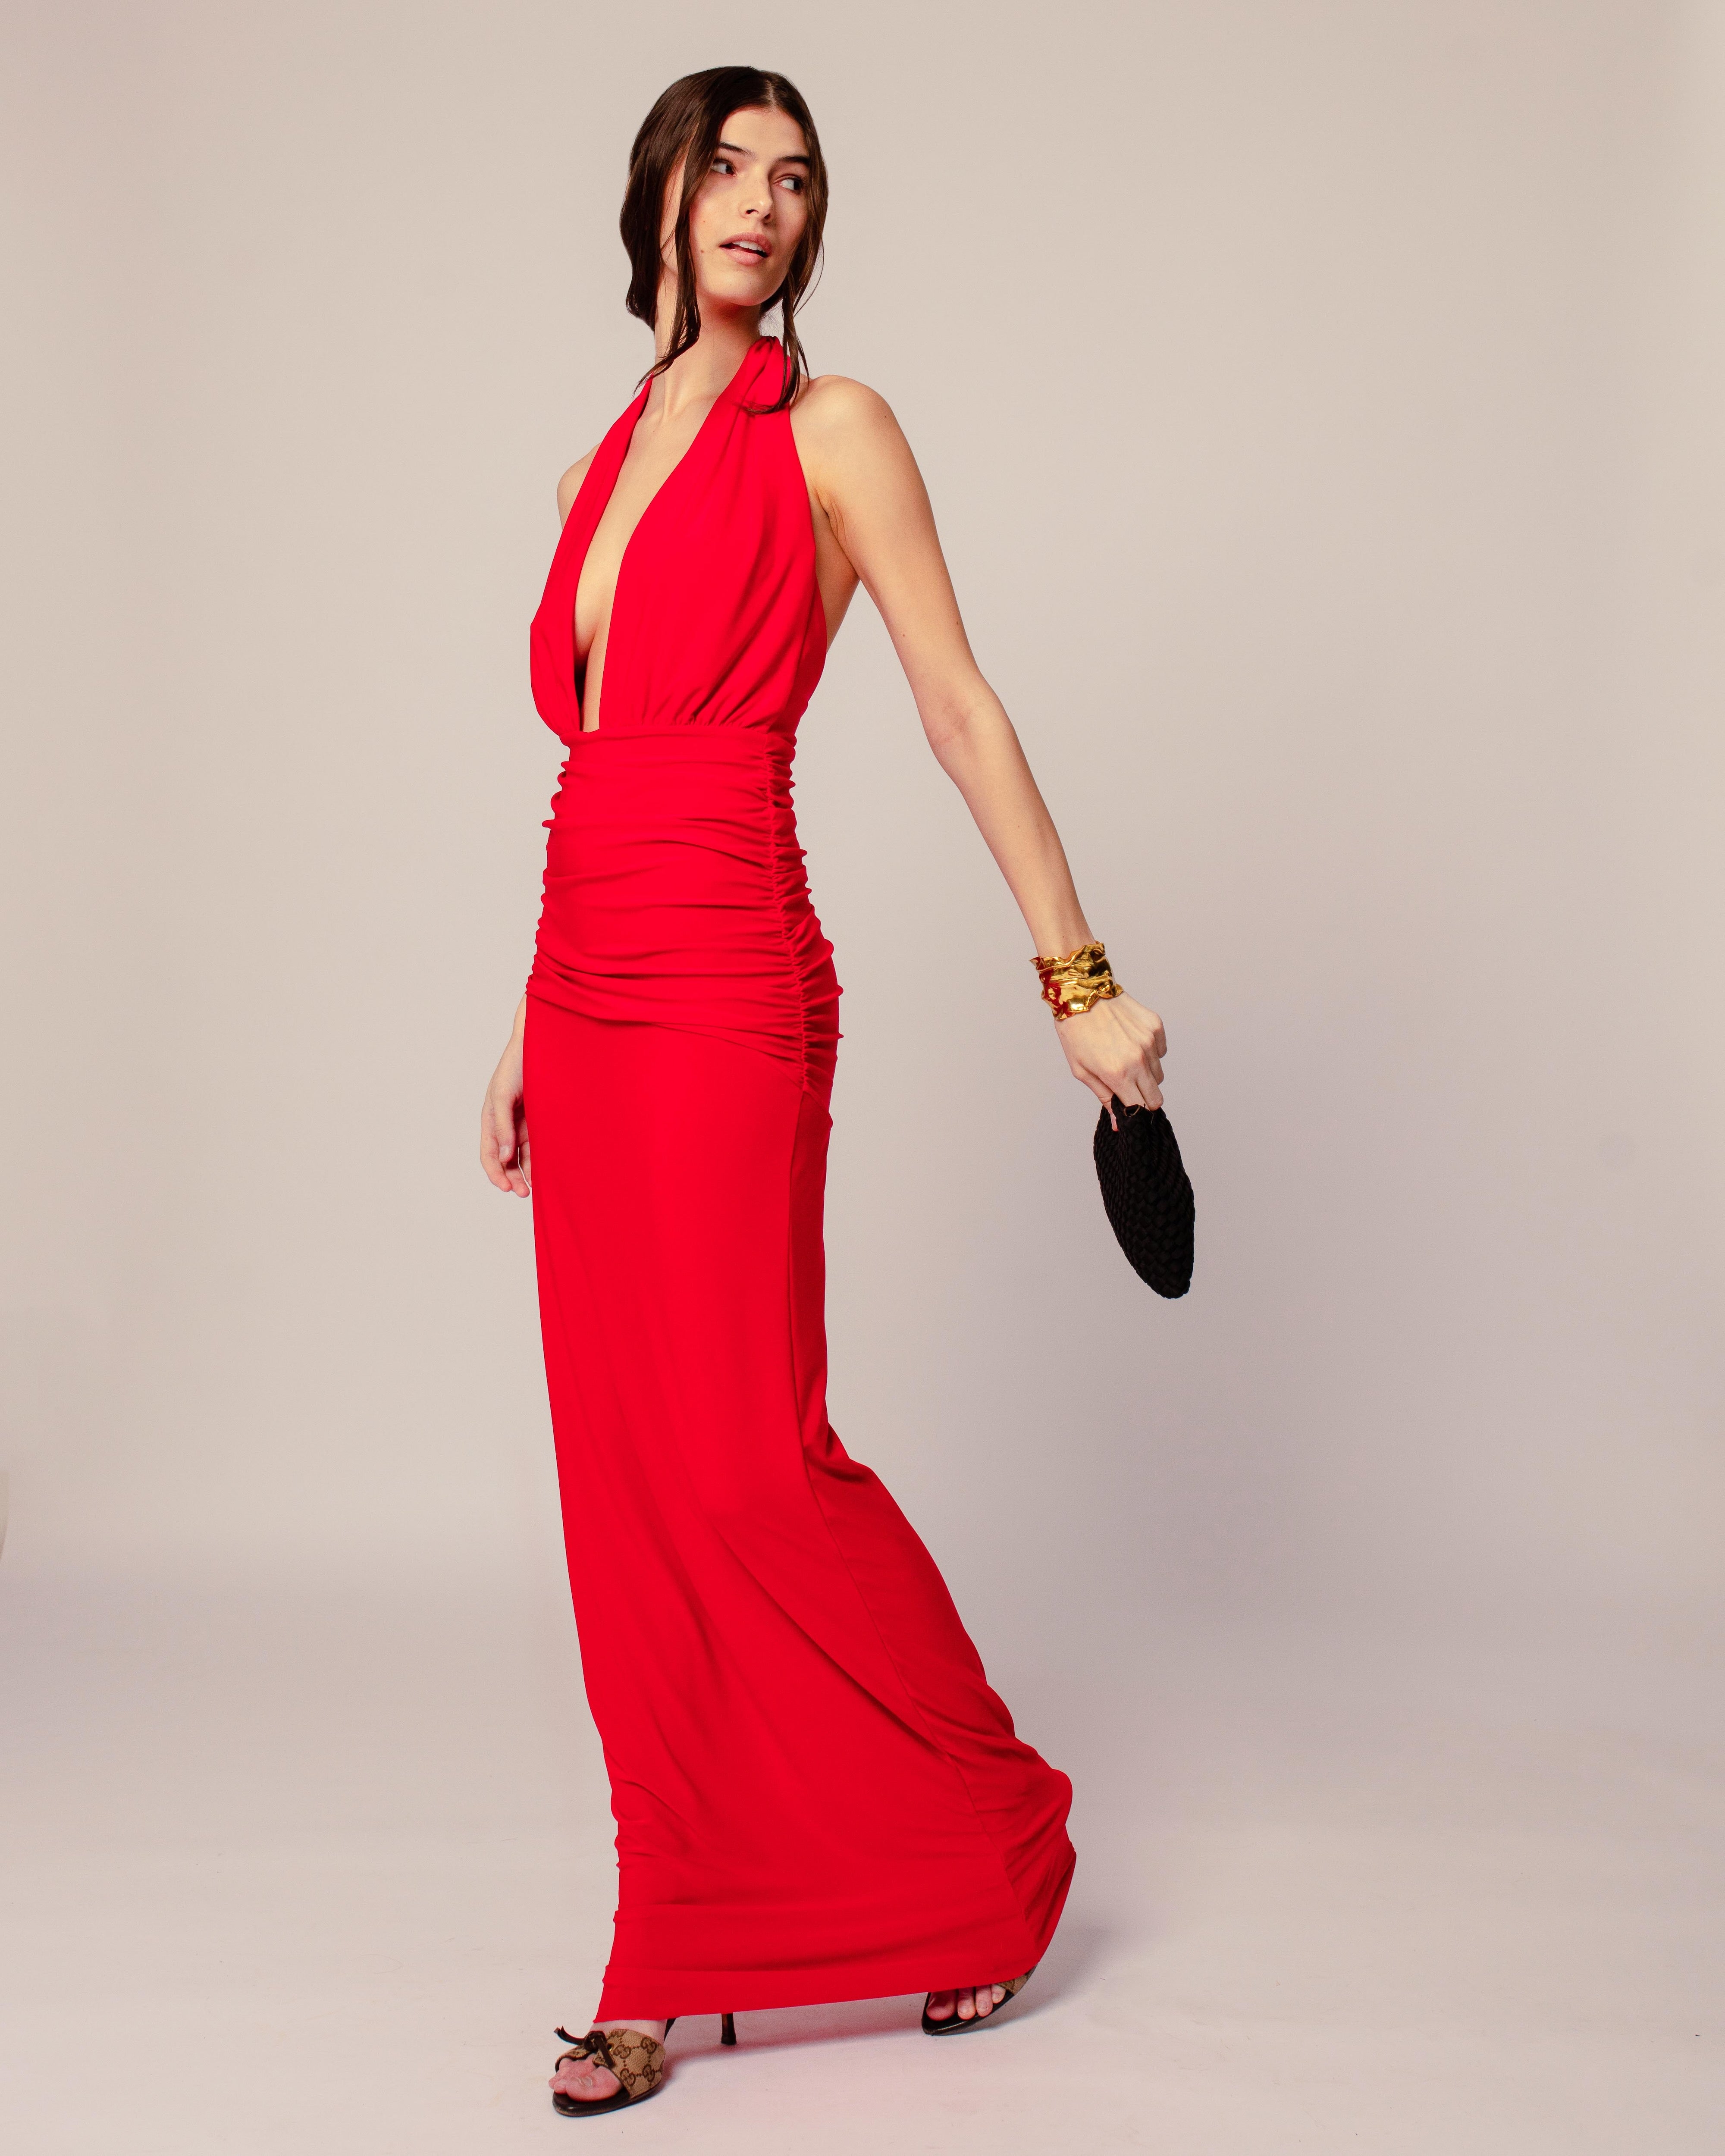 Halter Dress in Candy Apple Red